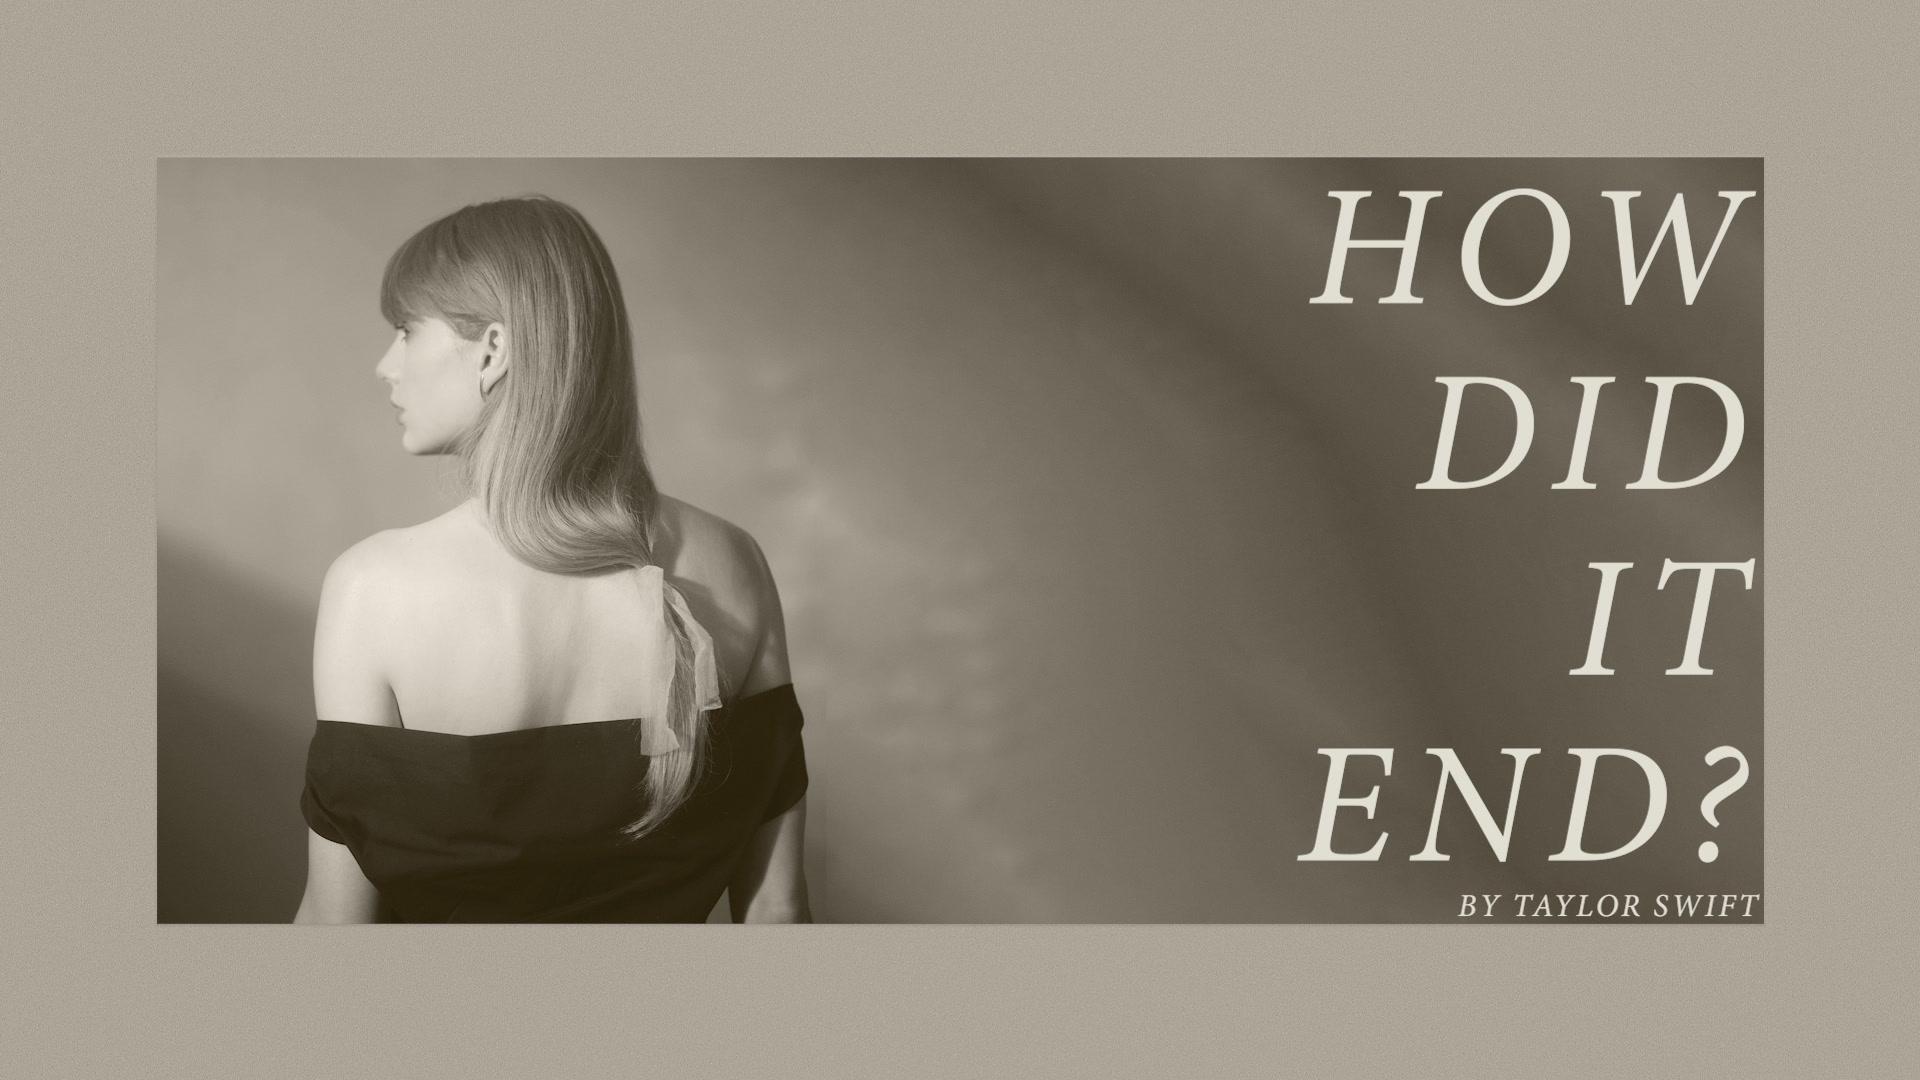 Taylor Swift - How Did It End? (Lyric Video)